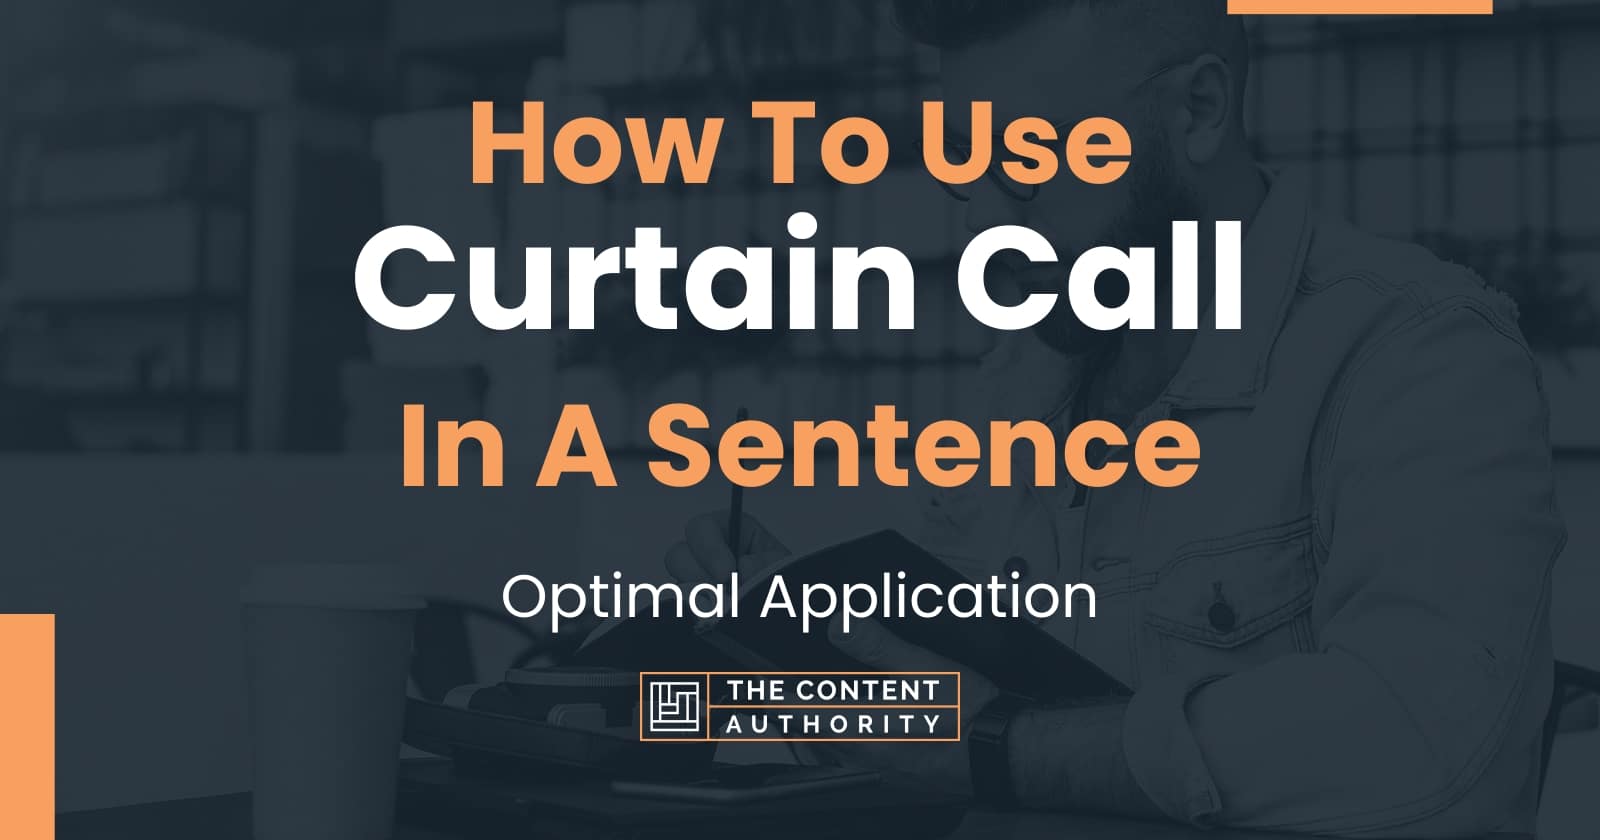 How To Use Curtain Call In A Sentence